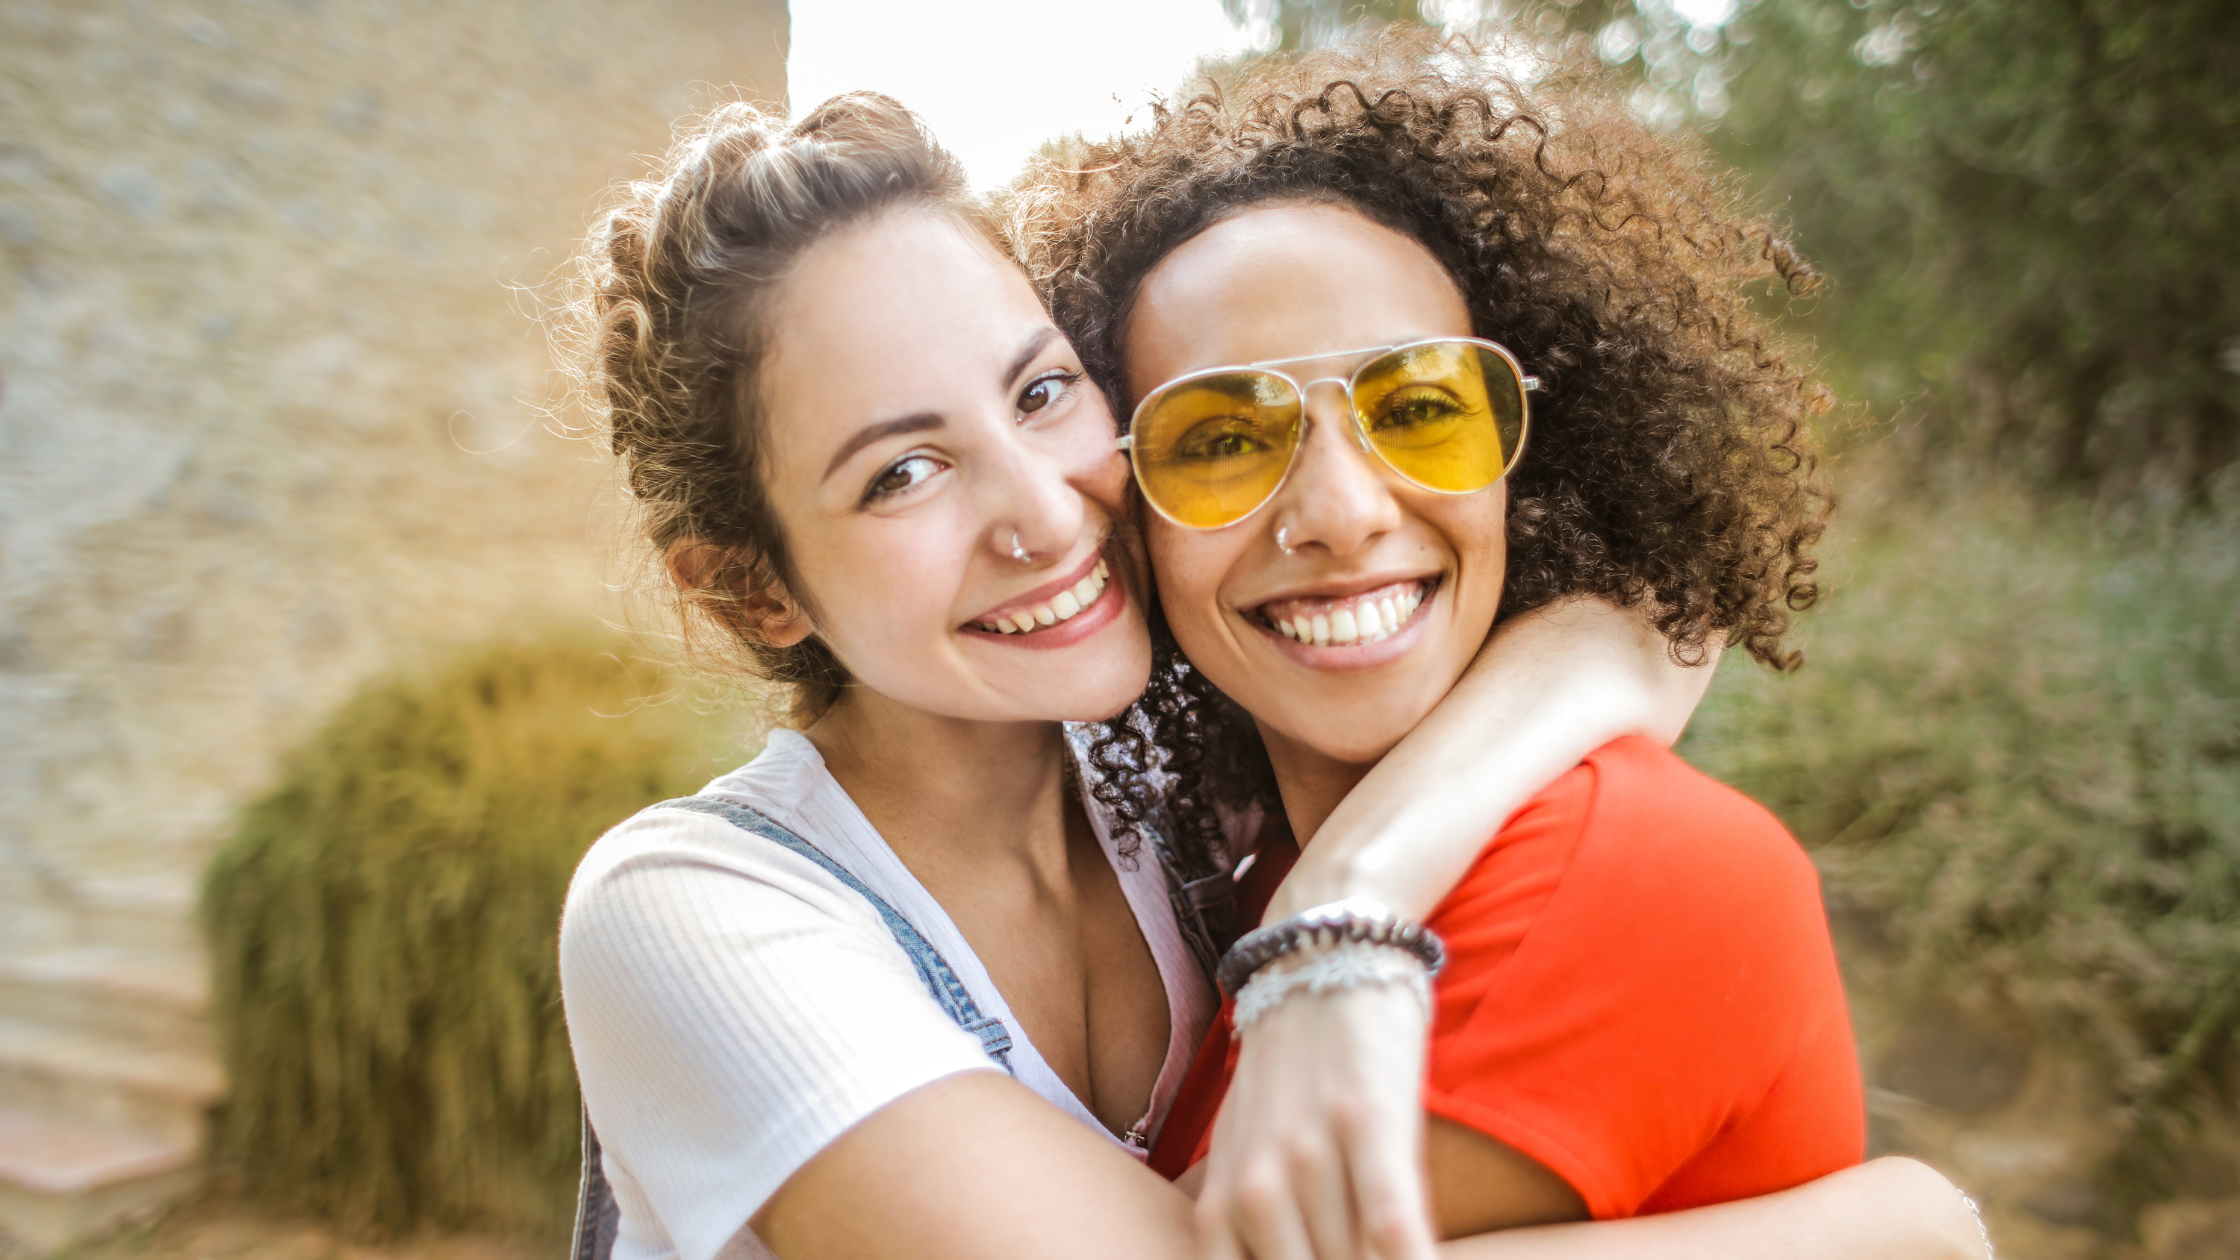 Two young ladies hugging and smiling outside